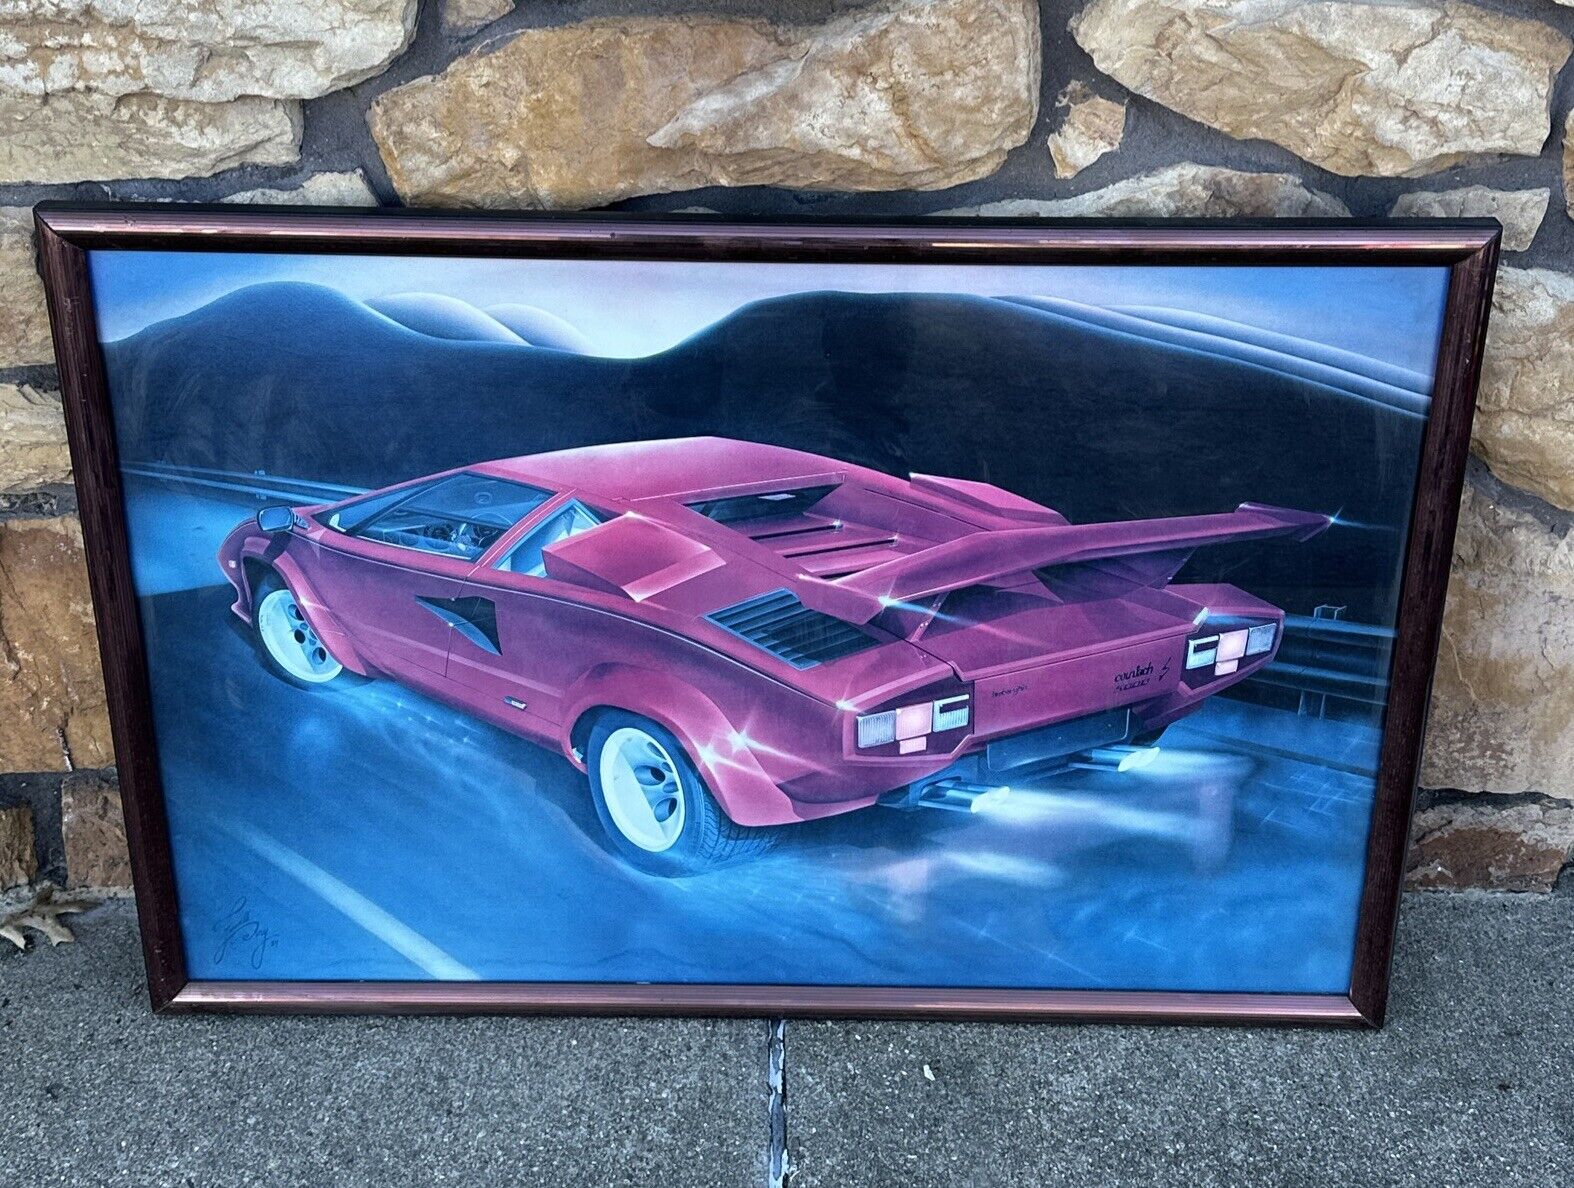 1984 Lamborghini Countach 5000S Poster Framed Signed “FARWELL PERRY” 34”x23”